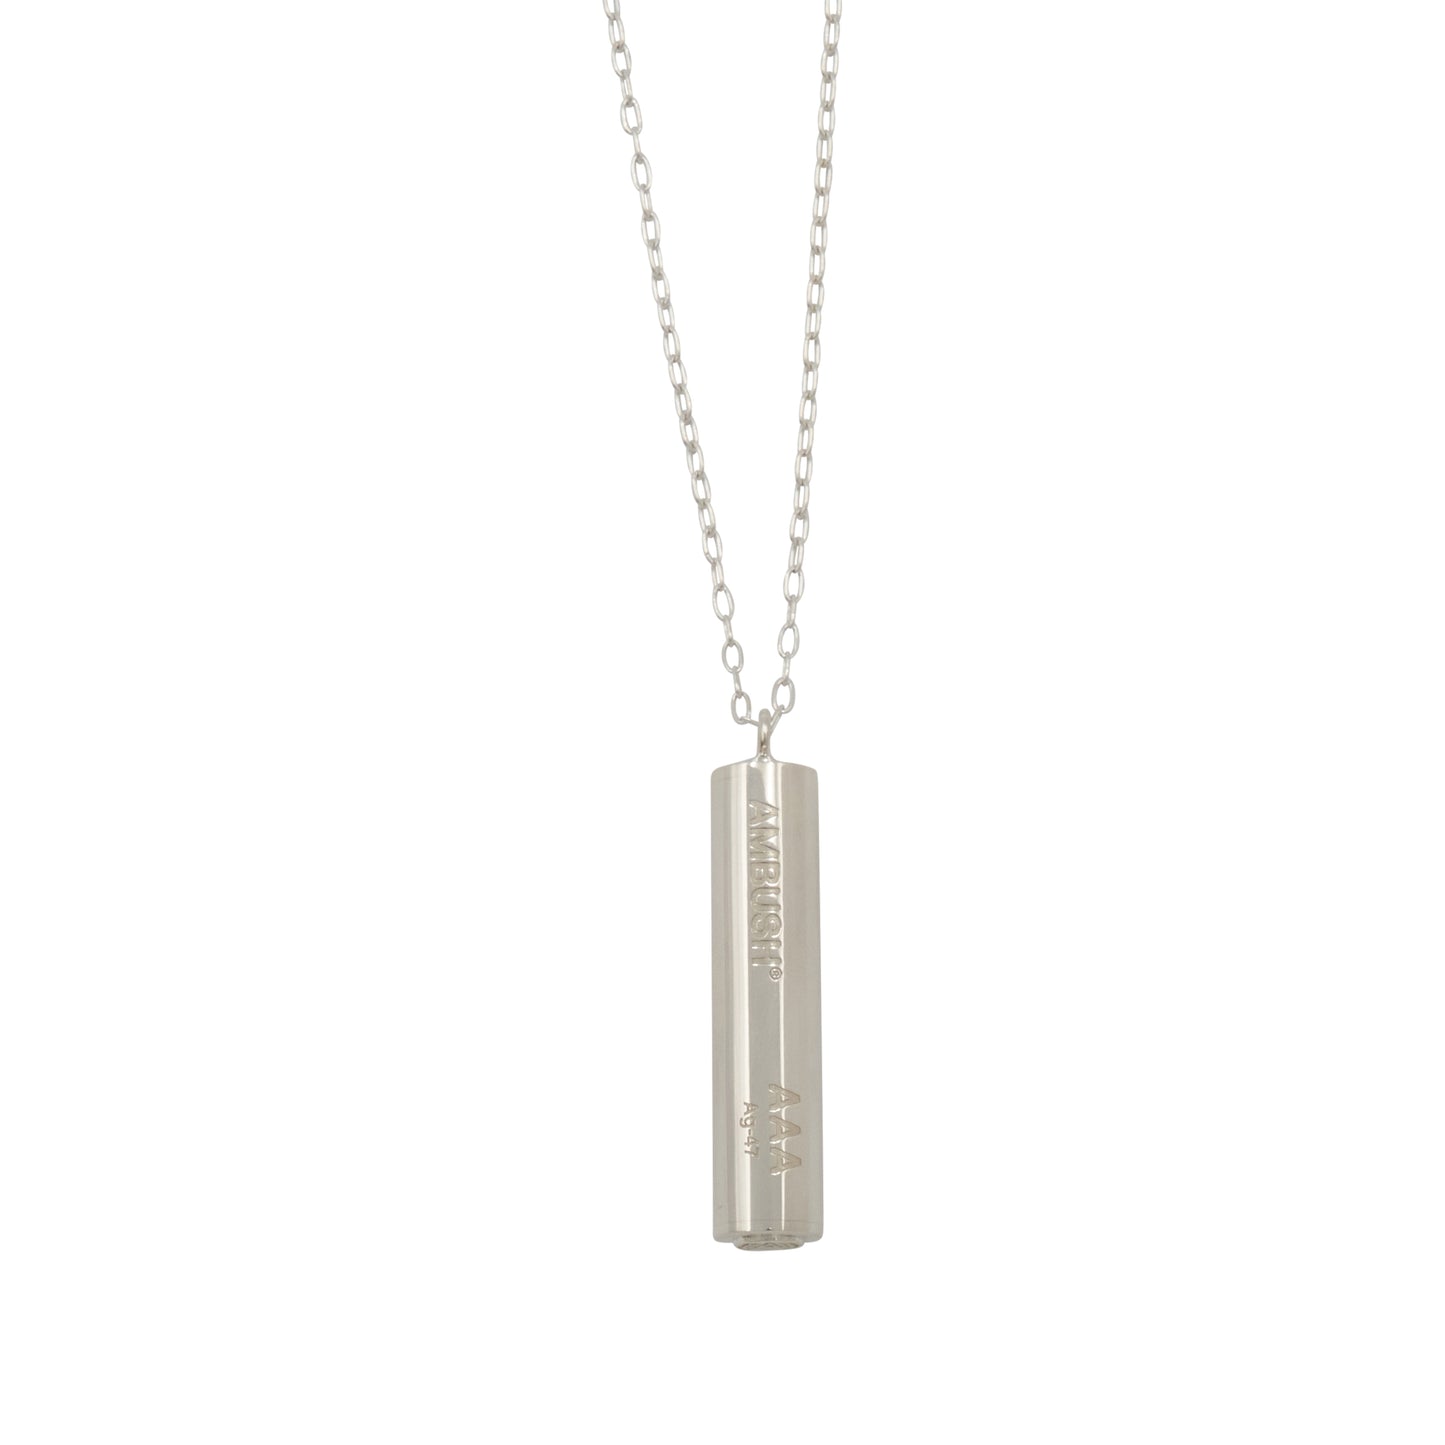 Battery Charm Necklace in Silver